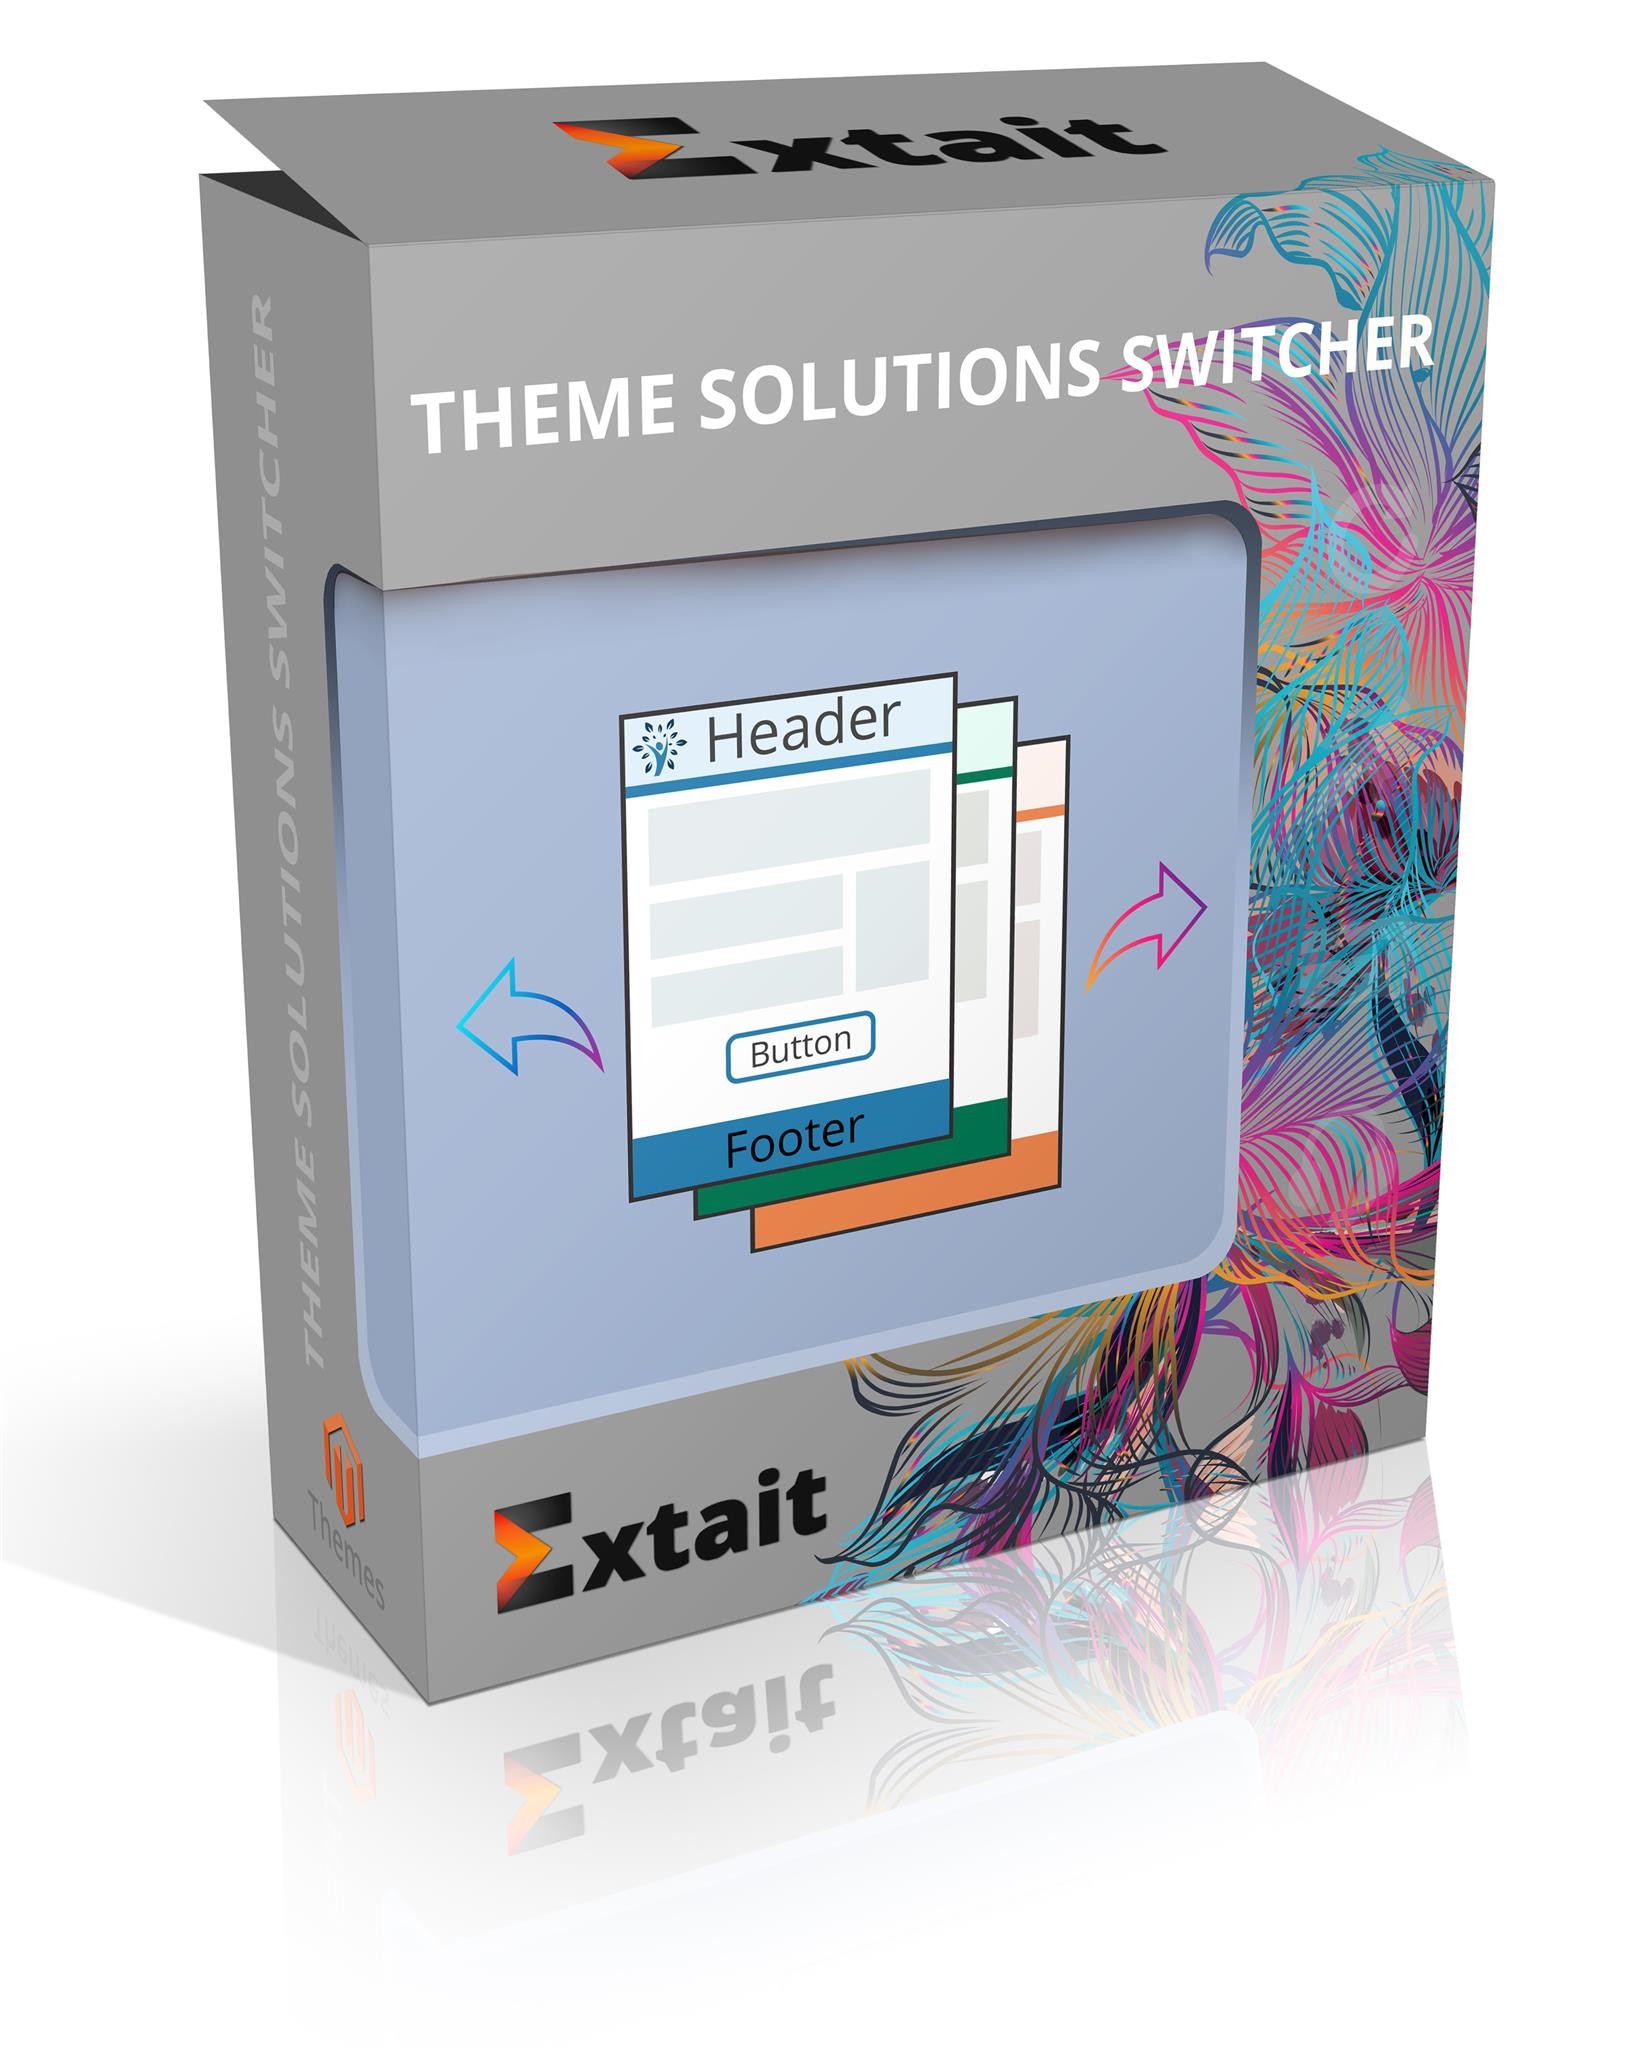 Themes Solutions Switcher 